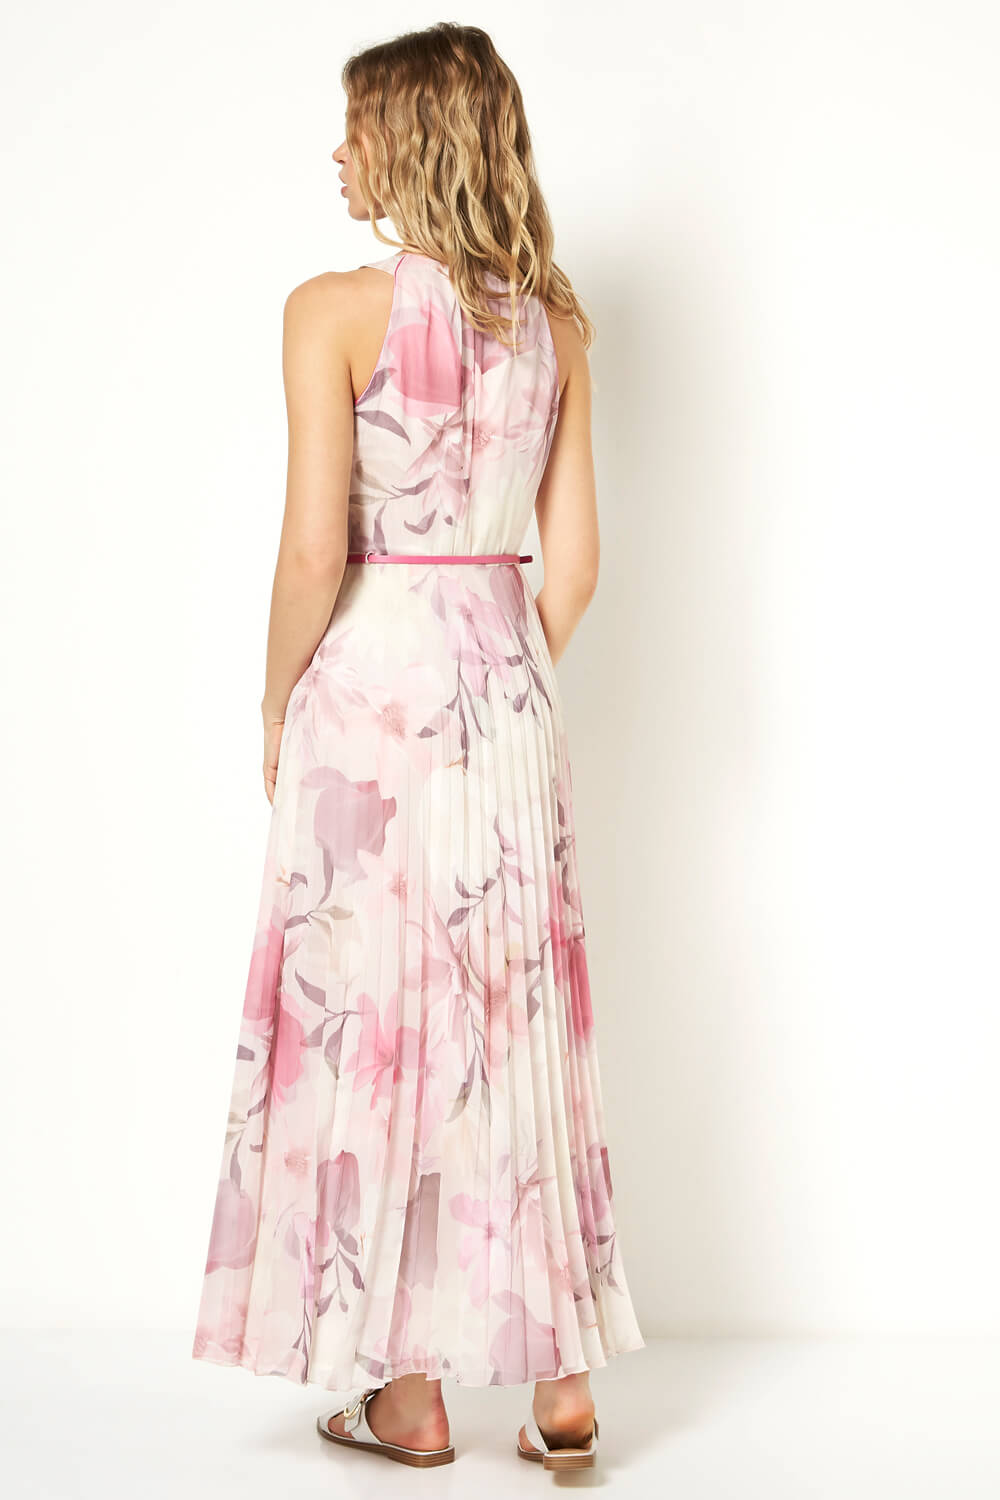 PINK Floral Pleated Maxi Dress, Image 2 of 5